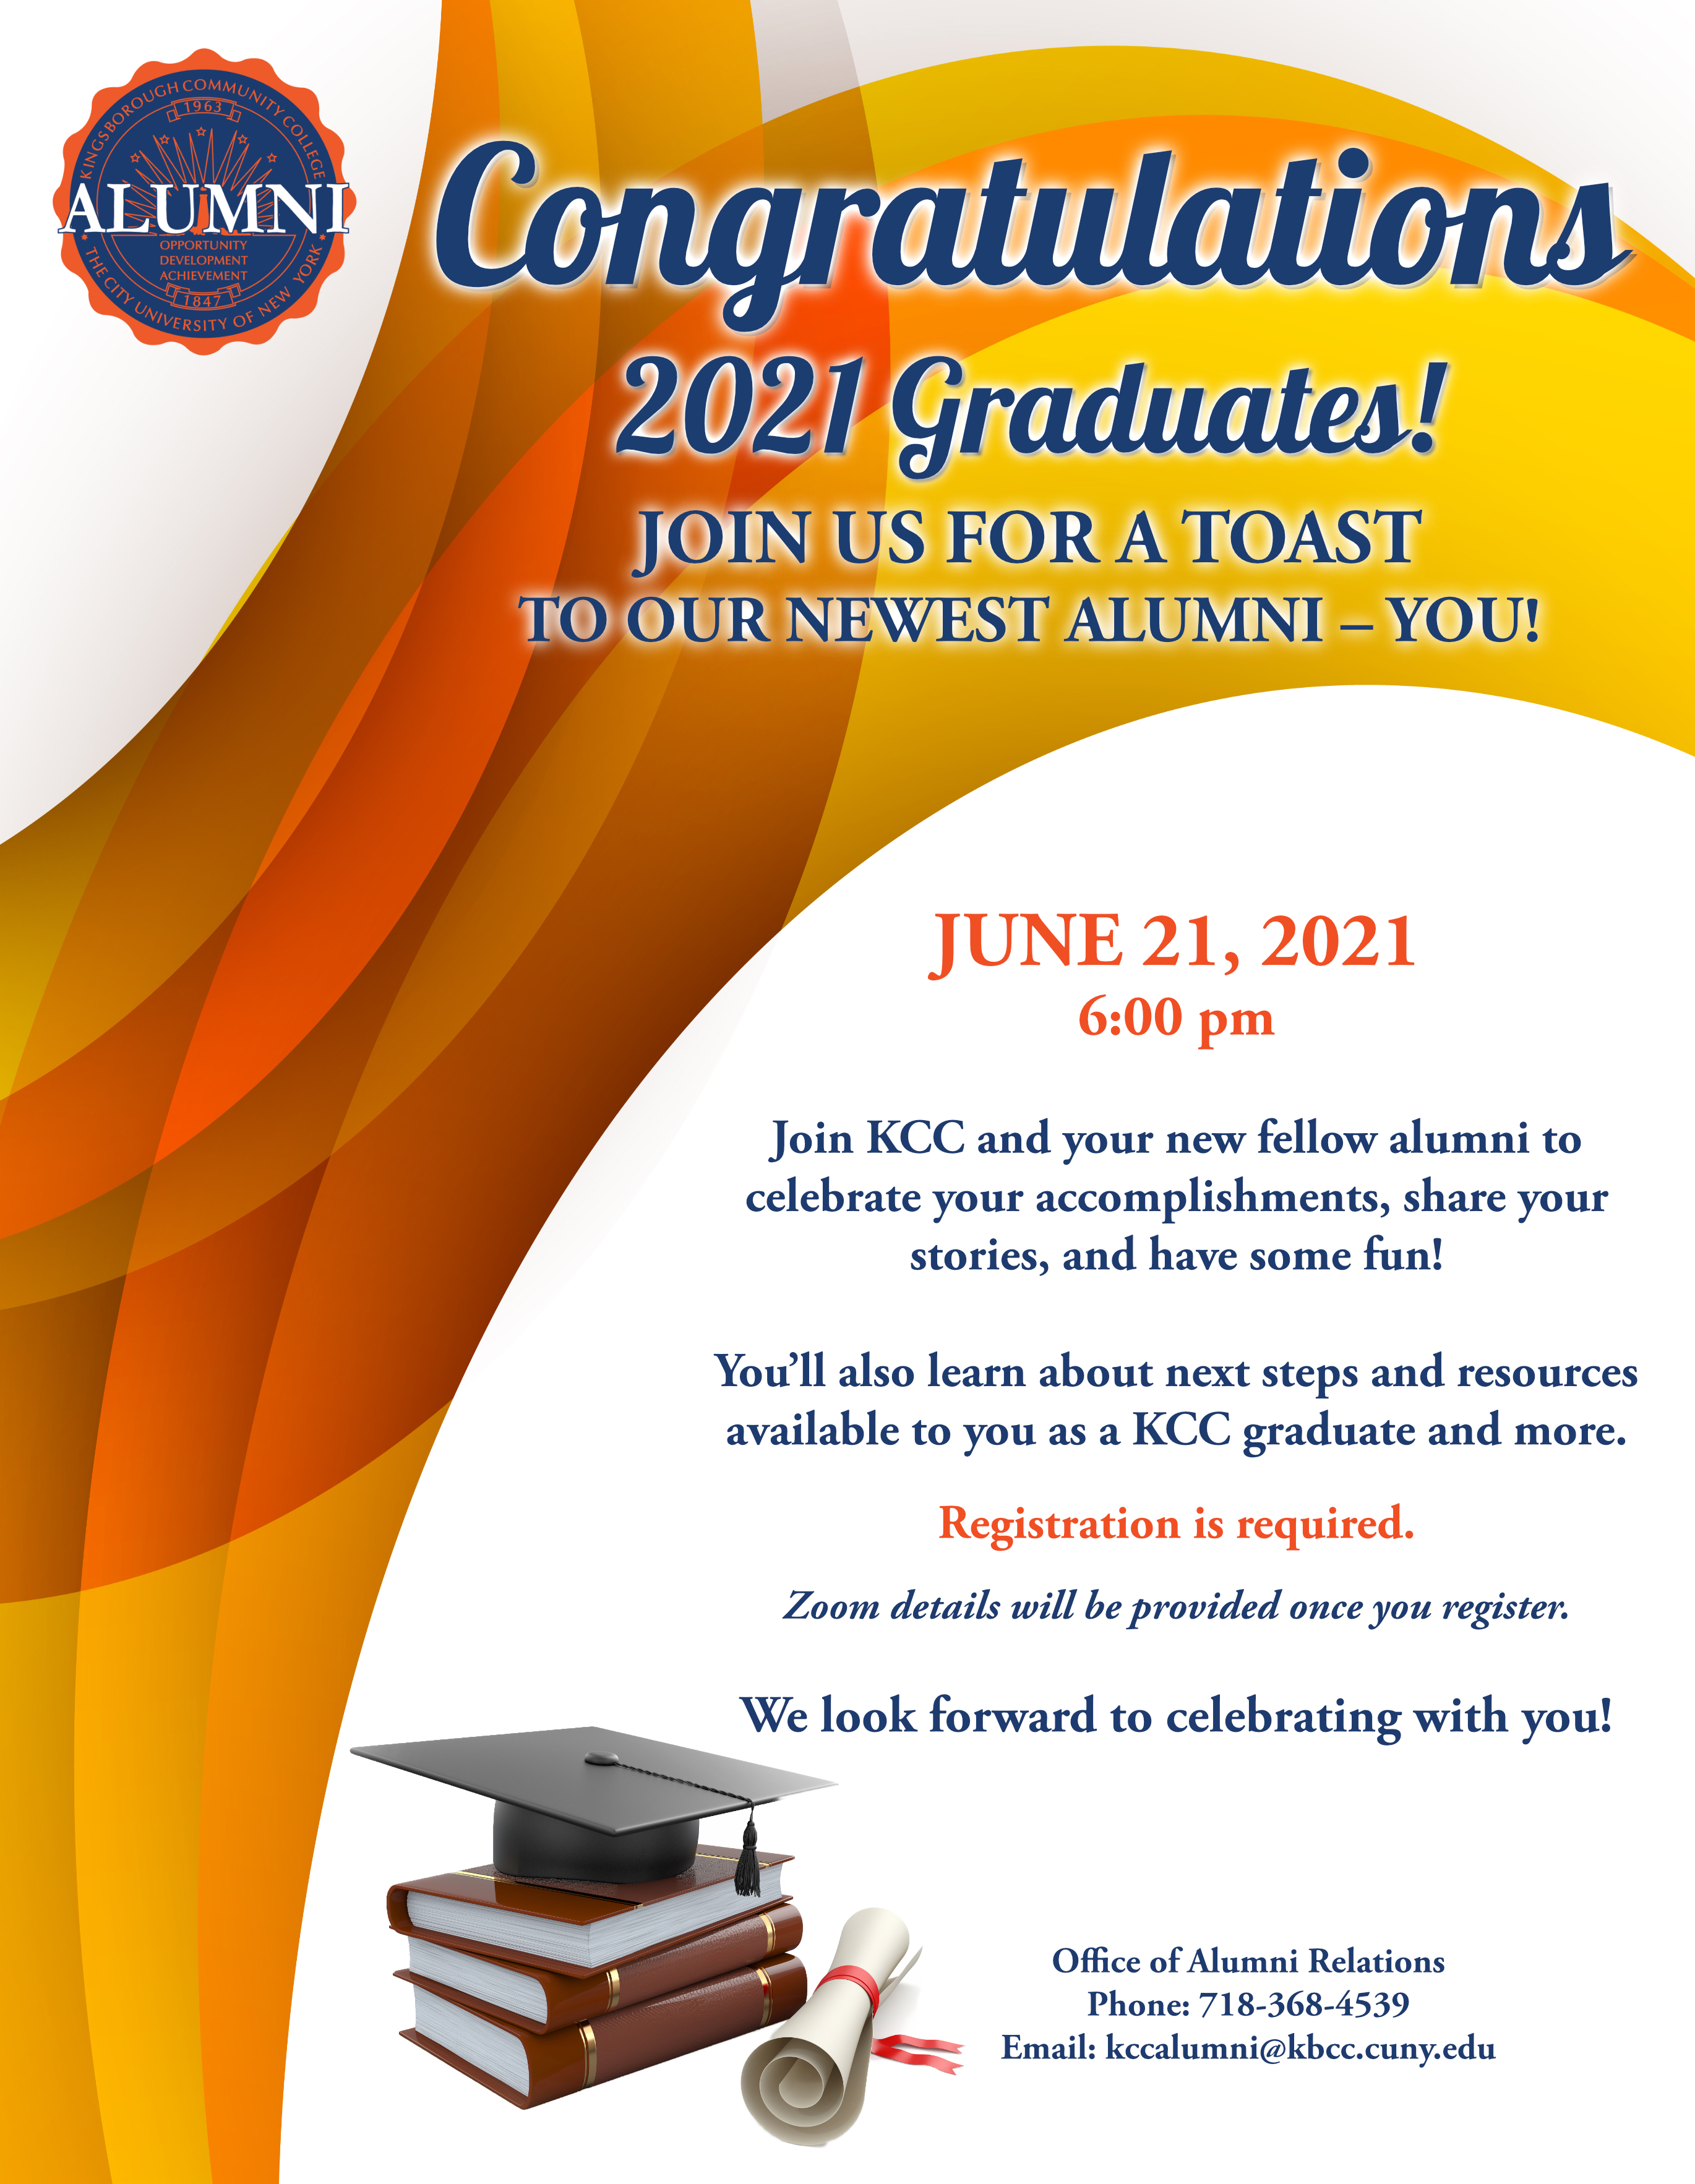  Join KCC and your new fellow alumni to celebrate your accomplishments, share your stories, and have some fun!  You’ll also learn about next steps and resources  available to you as a KCC graduate and more.